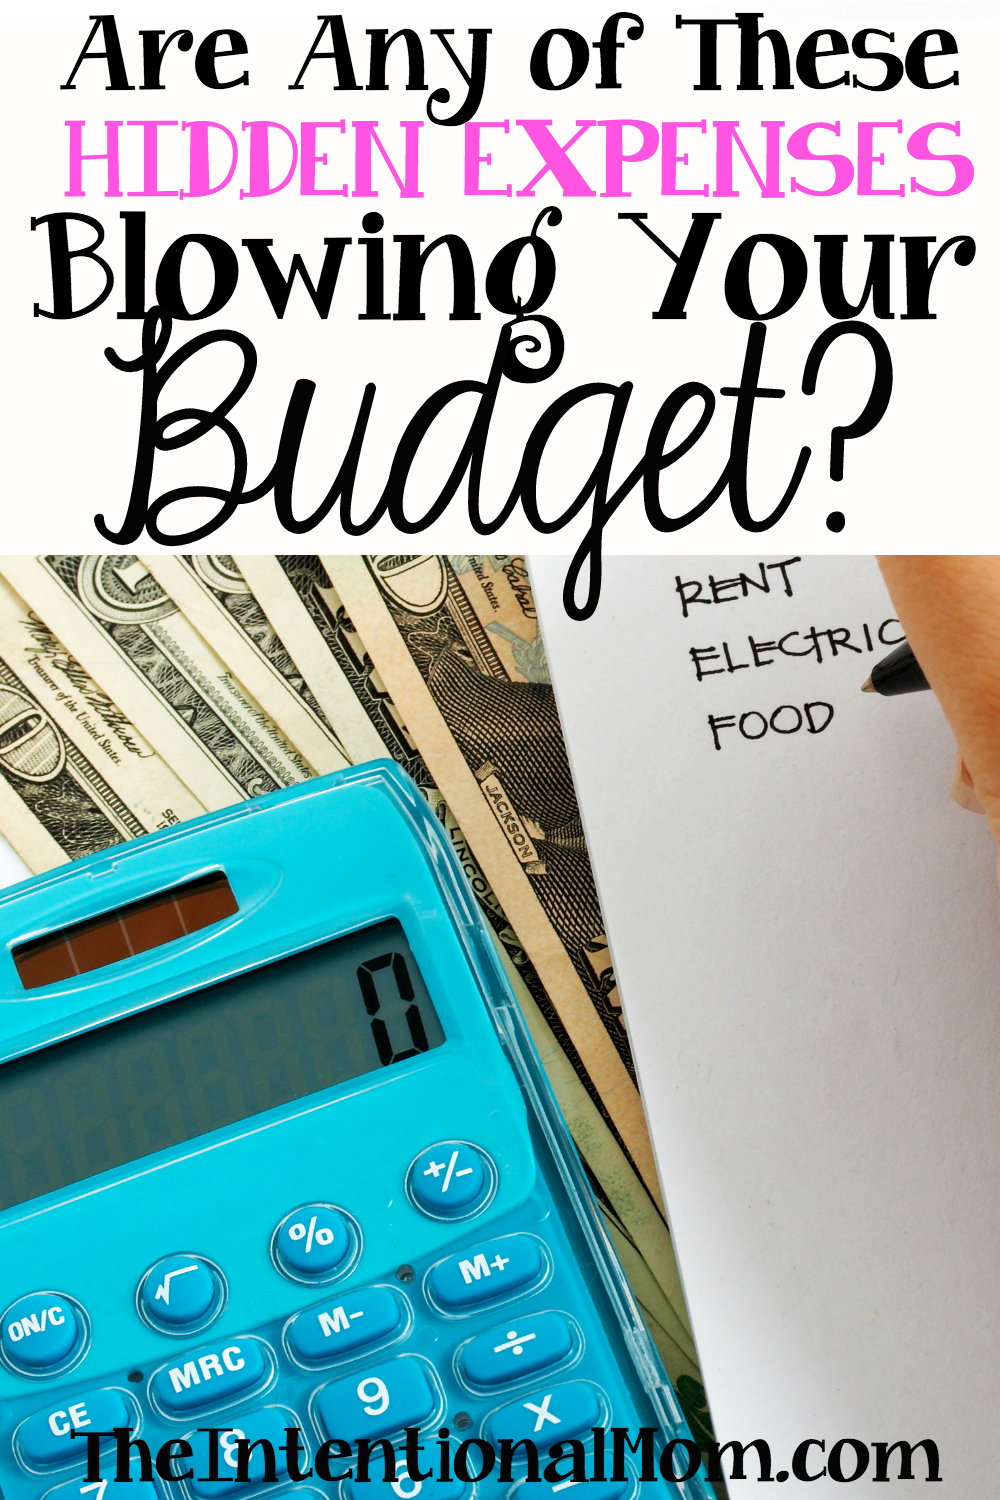 Are Any of These Hidden Expenses Blowing Your Budget?